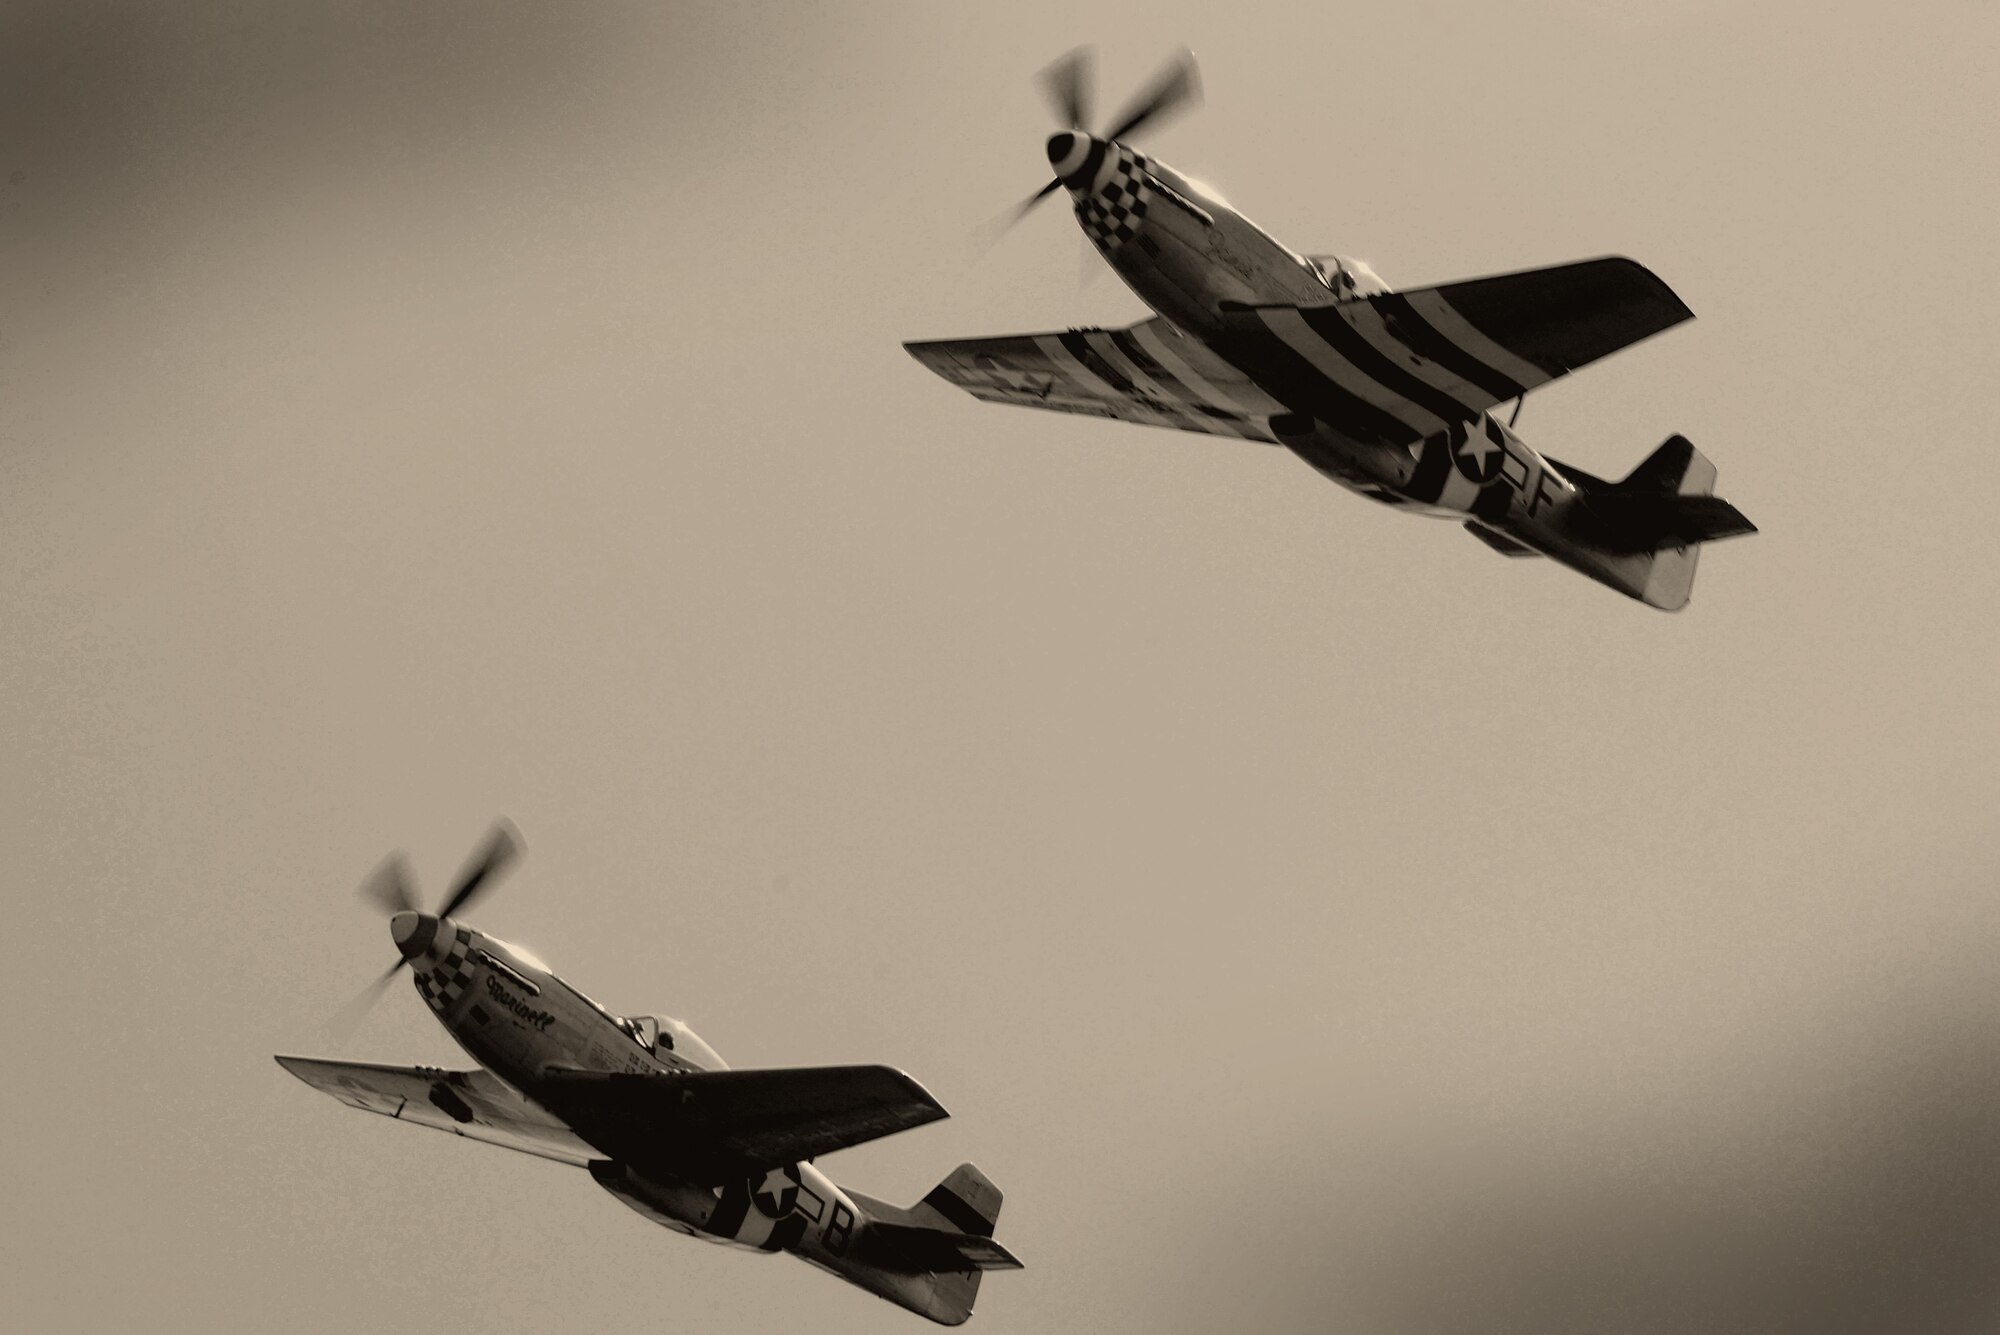 Two P-51 Mustang’s perform a flyover during the unveiling of the 490th Bombardment Group Memorial, May 29, in the village of Brome, England. Over 100 attendees gathered to witness the permanent monument dedicated to the men of the 490th for their contributions during World War II. (U.S. Air Force photo/ Tech Sgt. Matthew Plew)